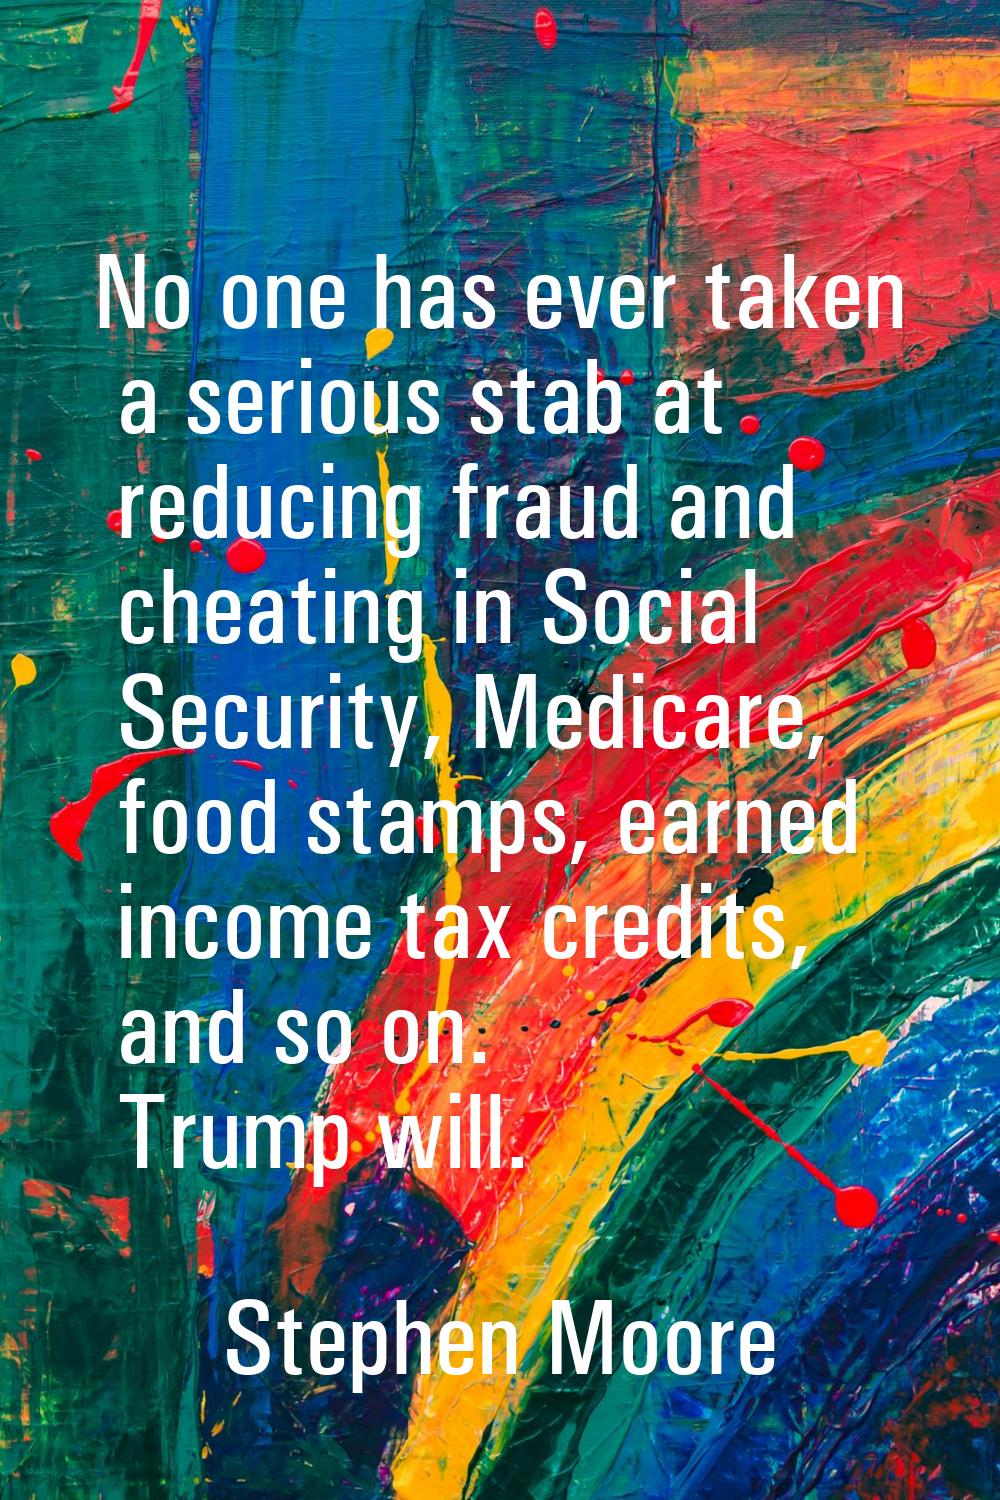 No one has ever taken a serious stab at reducing fraud and cheating in Social Security, Medicare, f